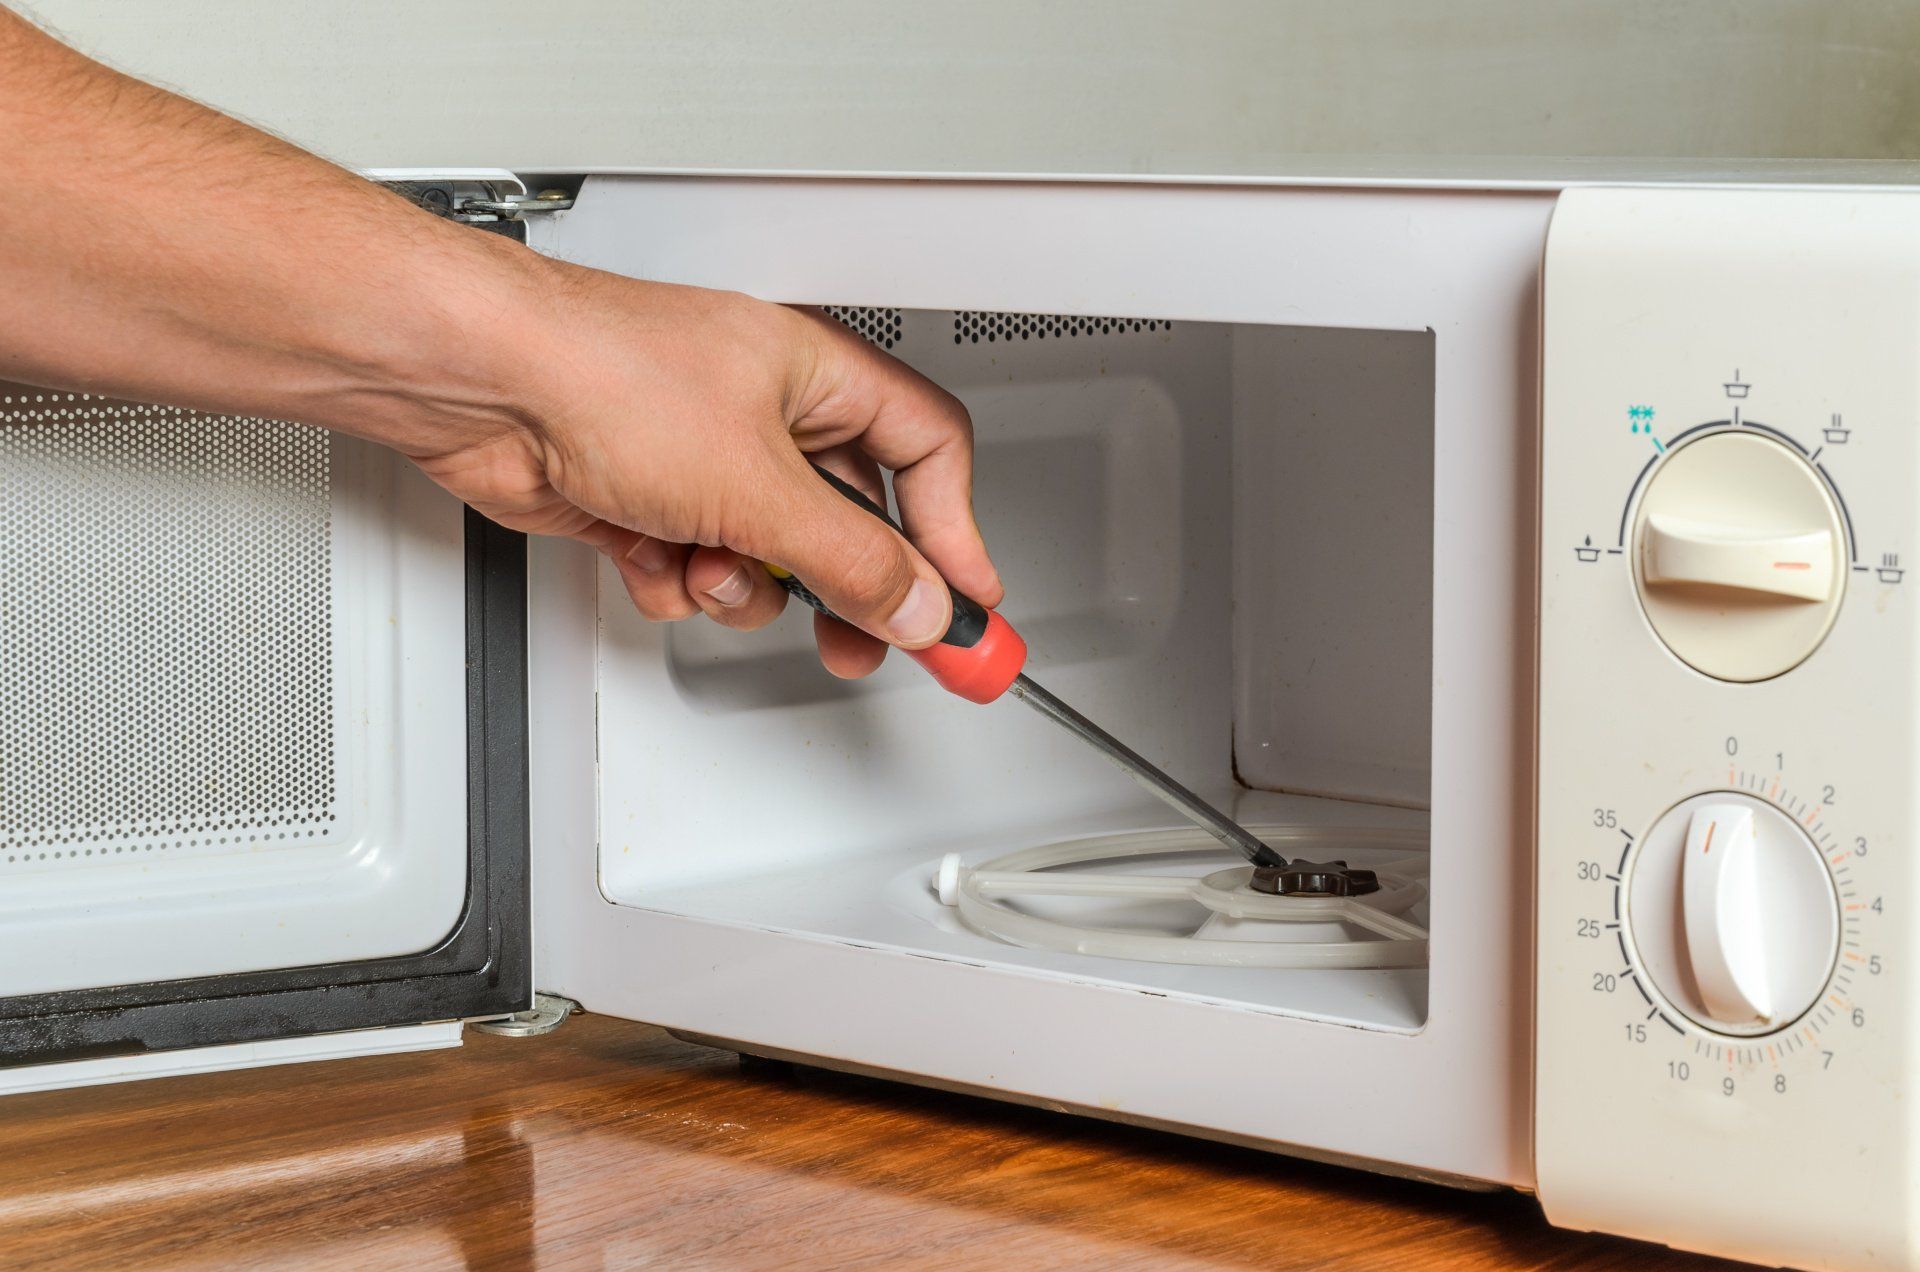 How to Fix a Microwave That Isn't Heating